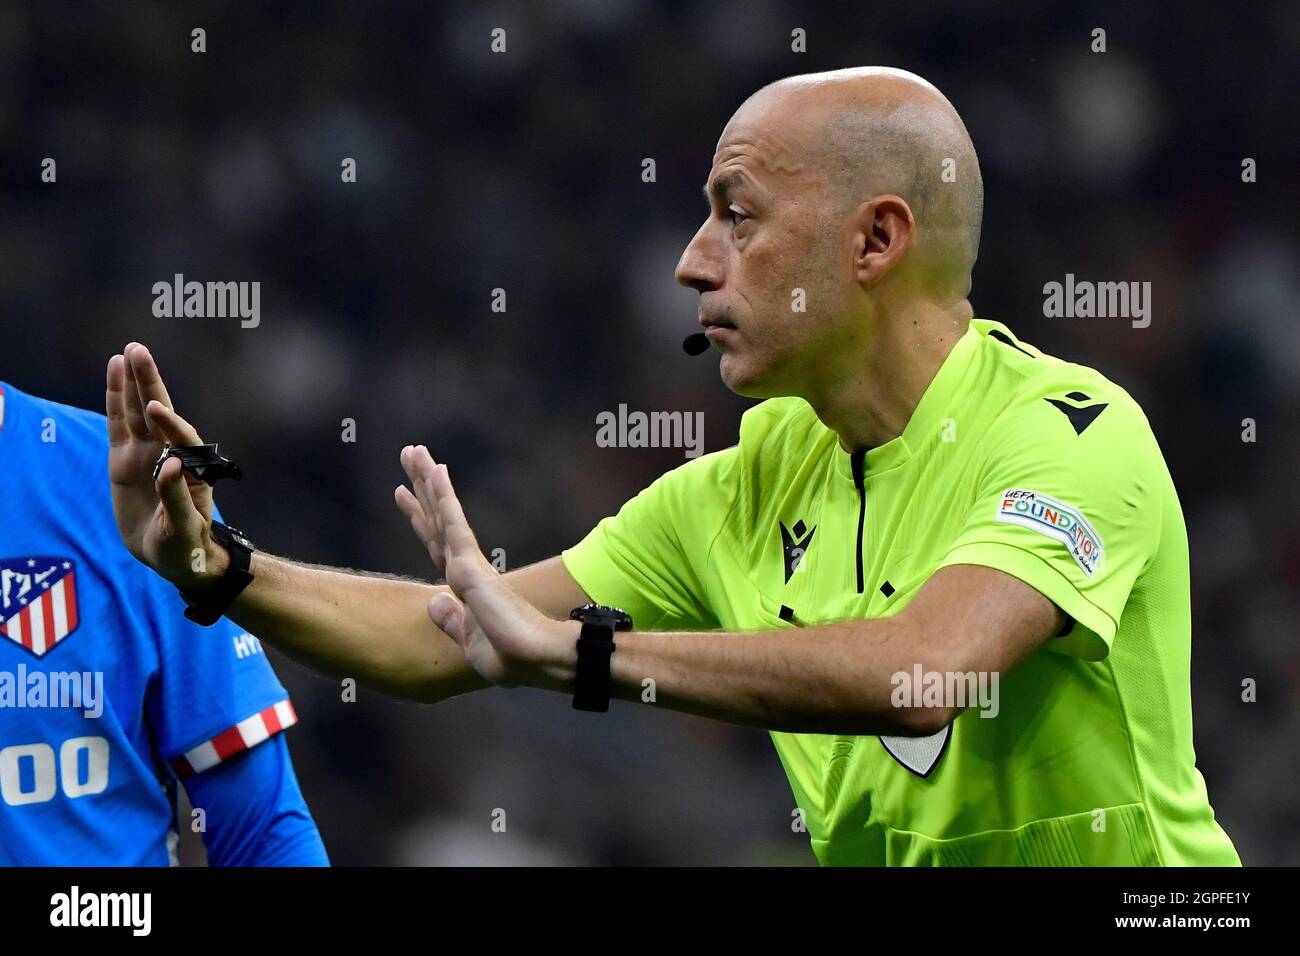 Milan Italy 28th Sep 21 Referee Cuneyt Cakir Reacts During The Uefa Champions League Group B Football Match Between Ac Milan And Atletico Madrid At San Siro Stadium In Milan Italy September